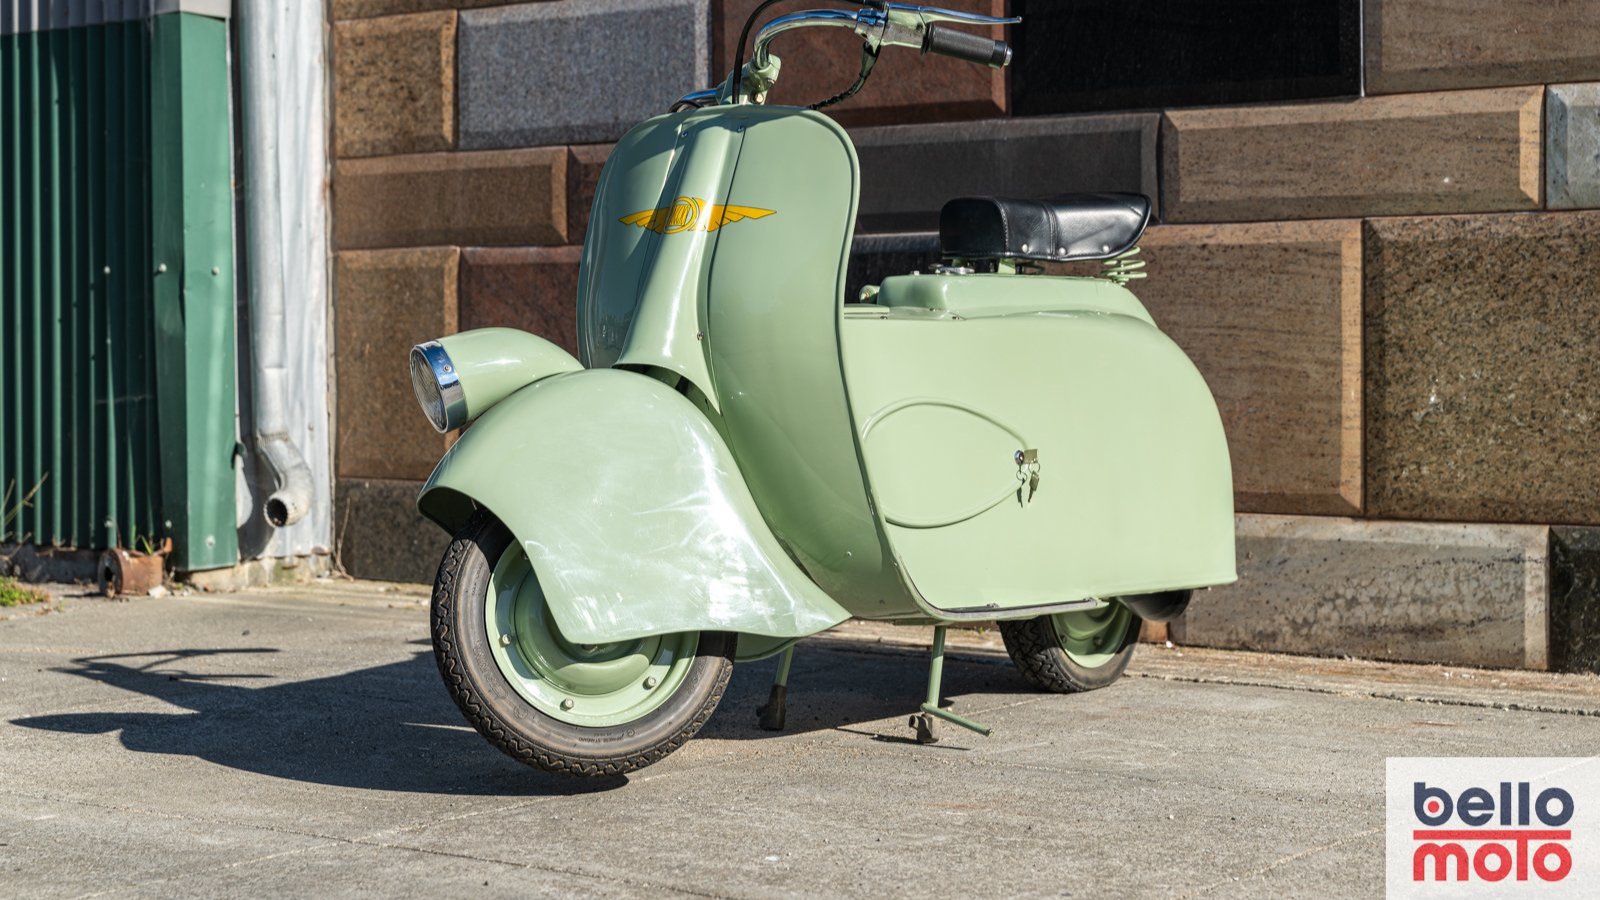 The history of the iconic Vespa 125 scooter